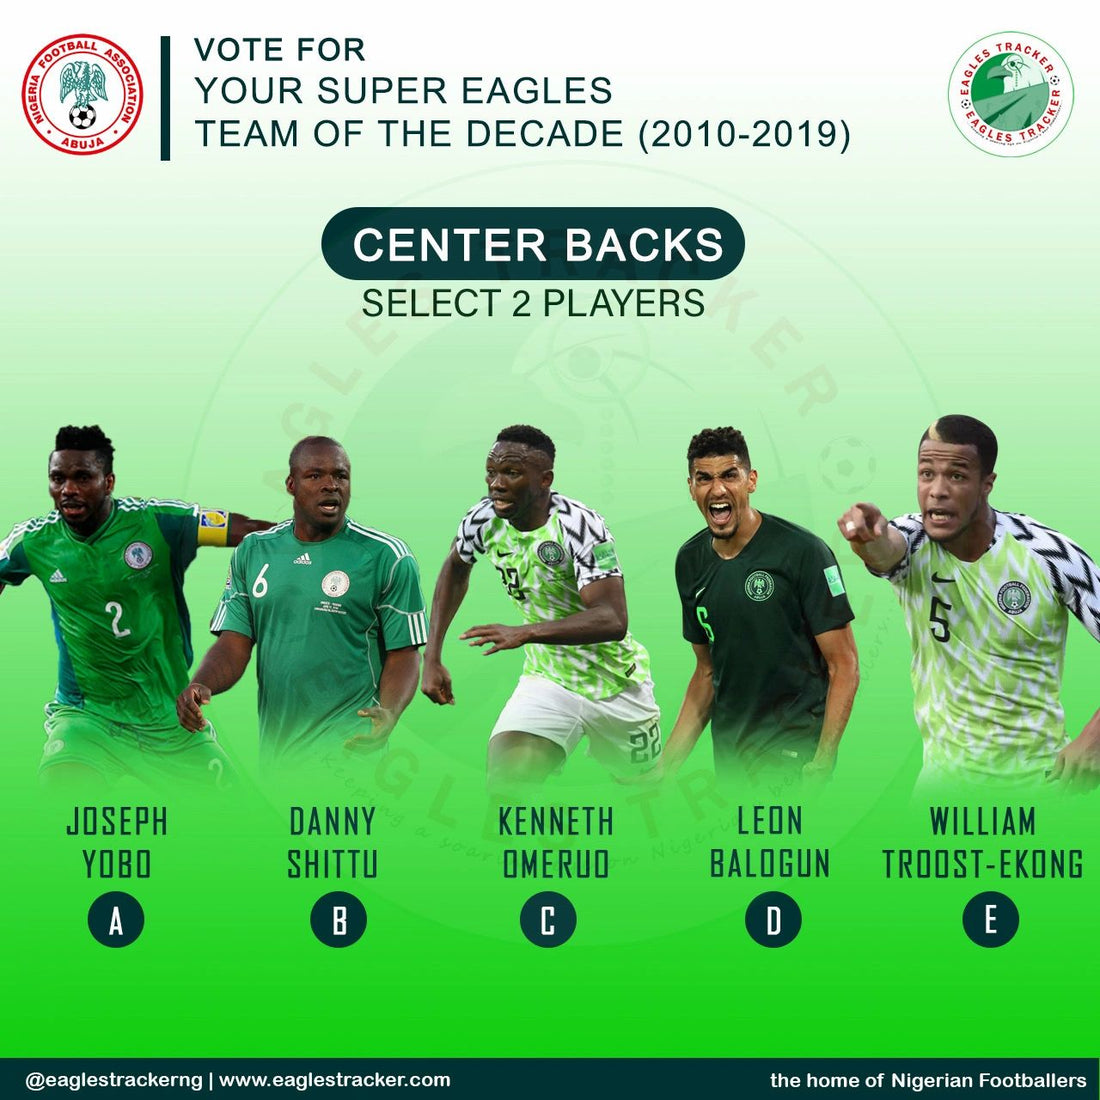 VOTE FOR YOUR SUPER EAGLES TEAM OF THE DECADE (CENTER BACKS)